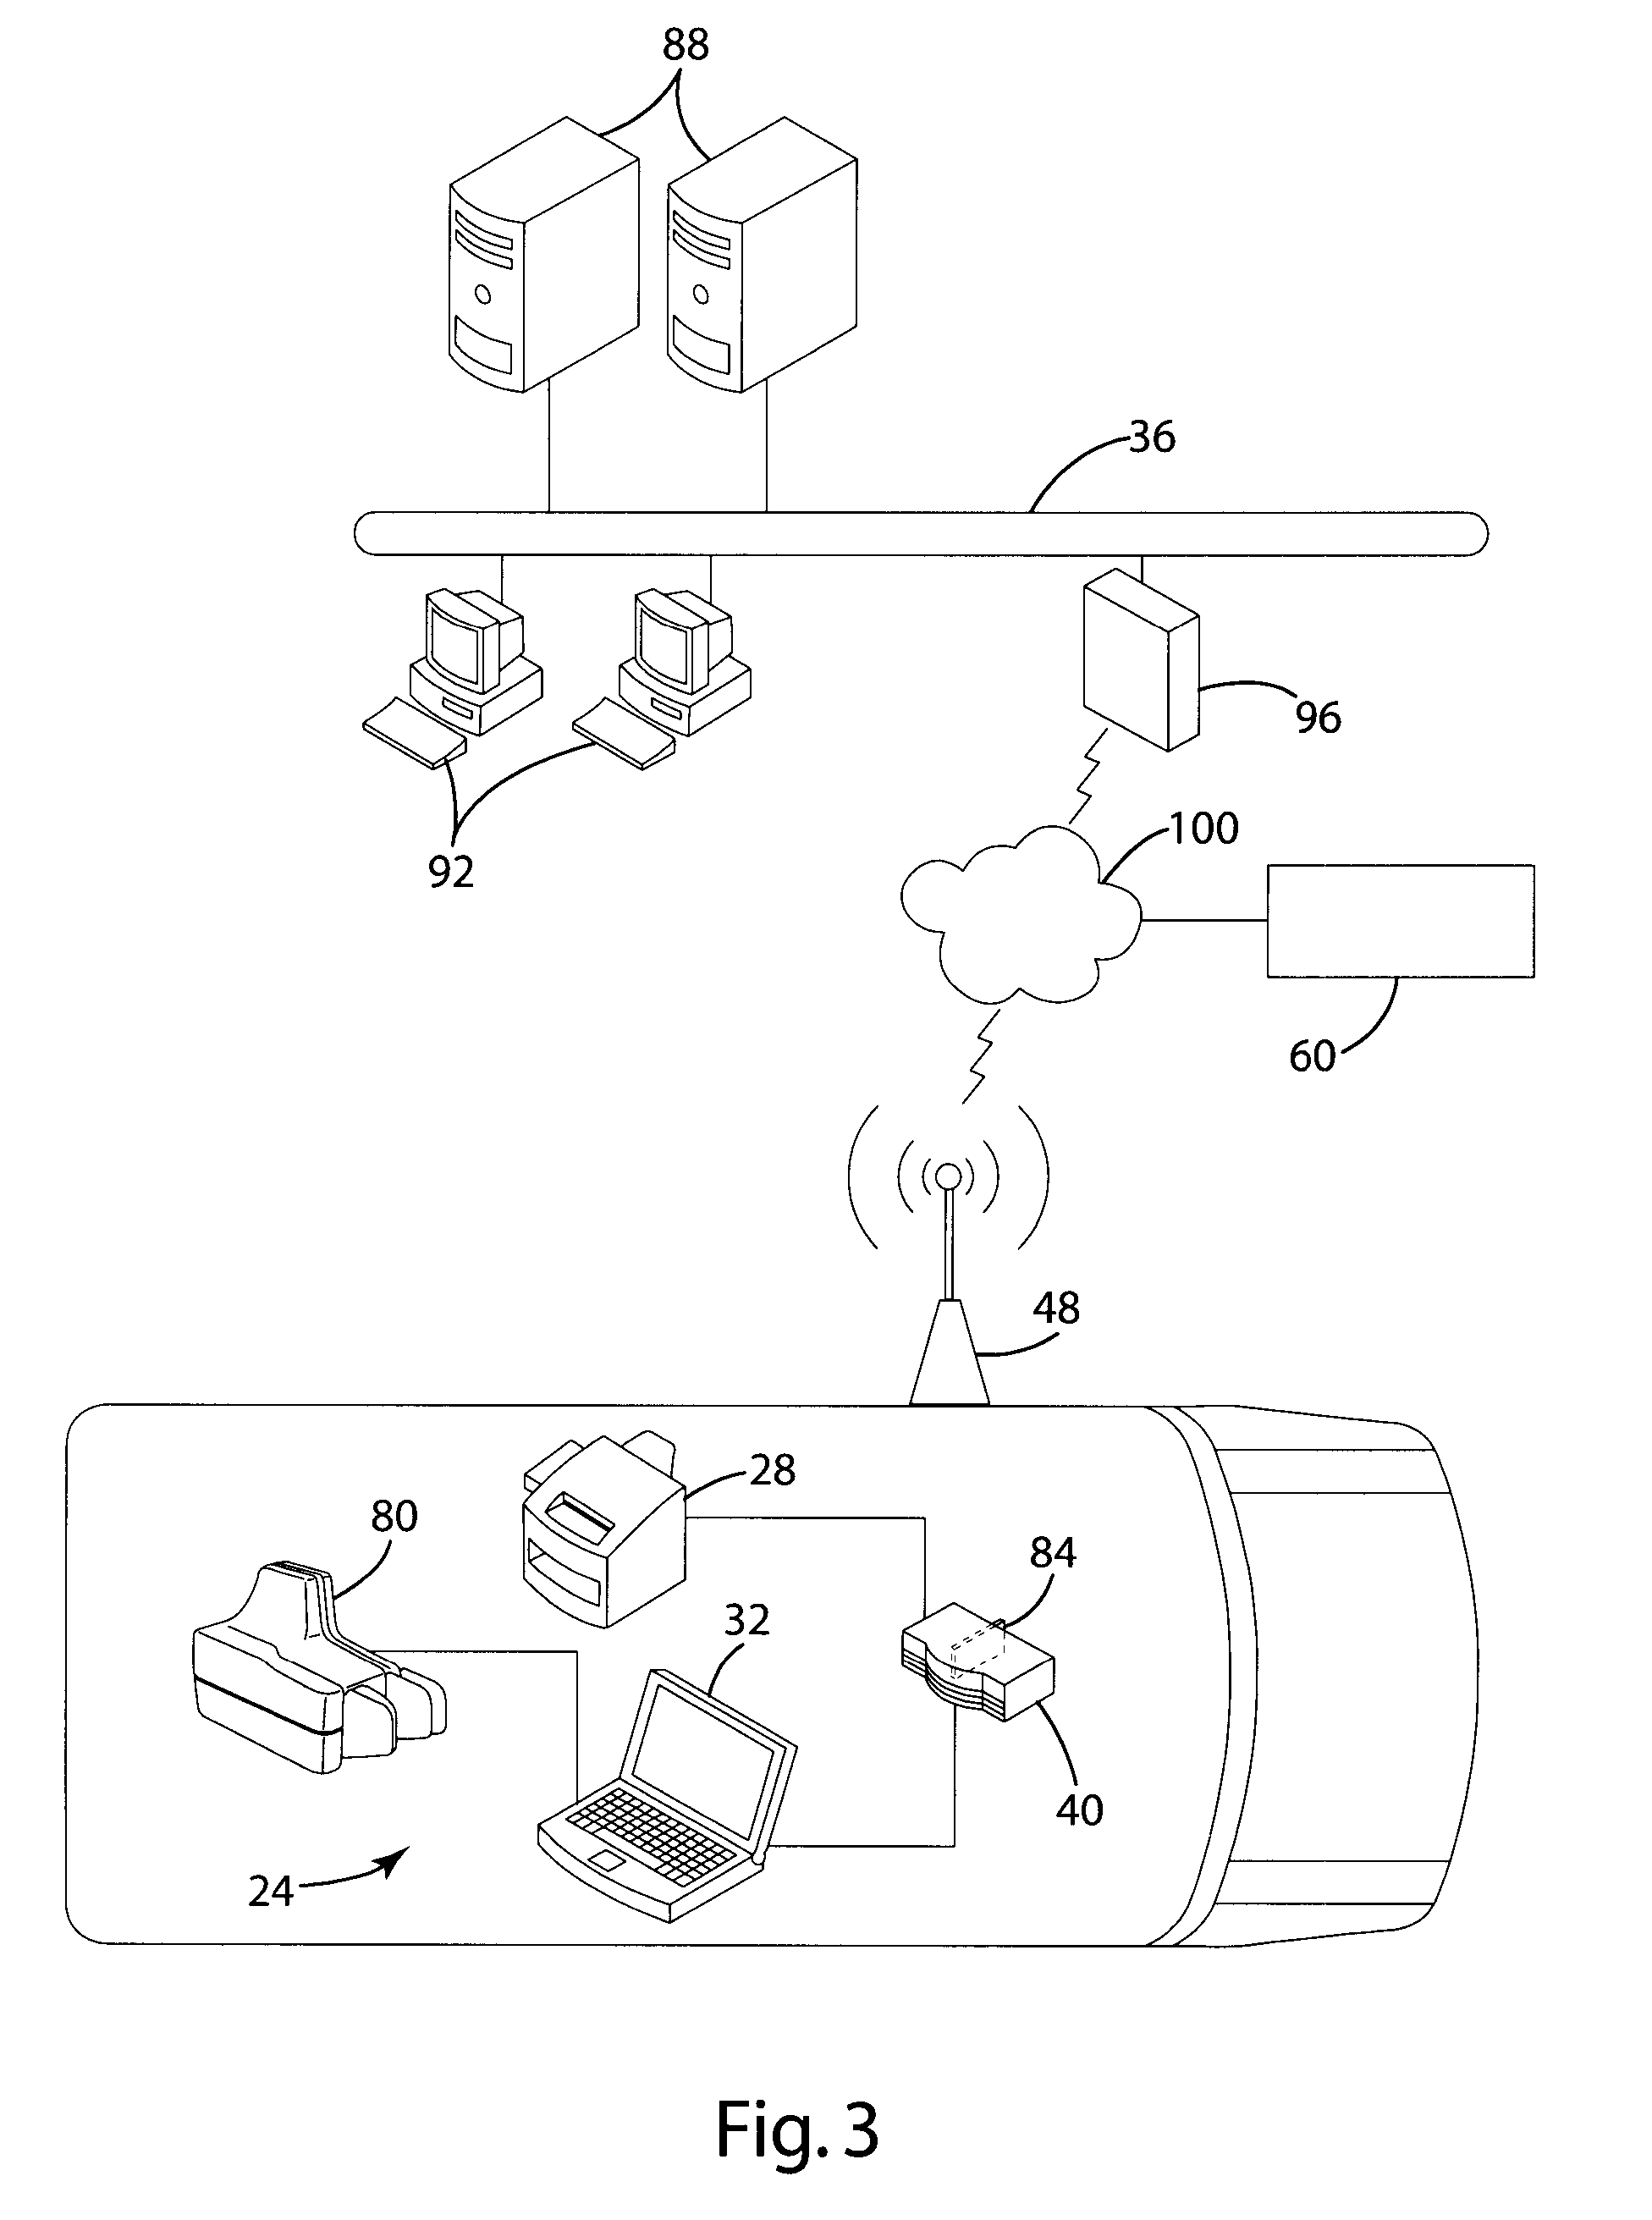 Mobile system and method for processing real estate transactions